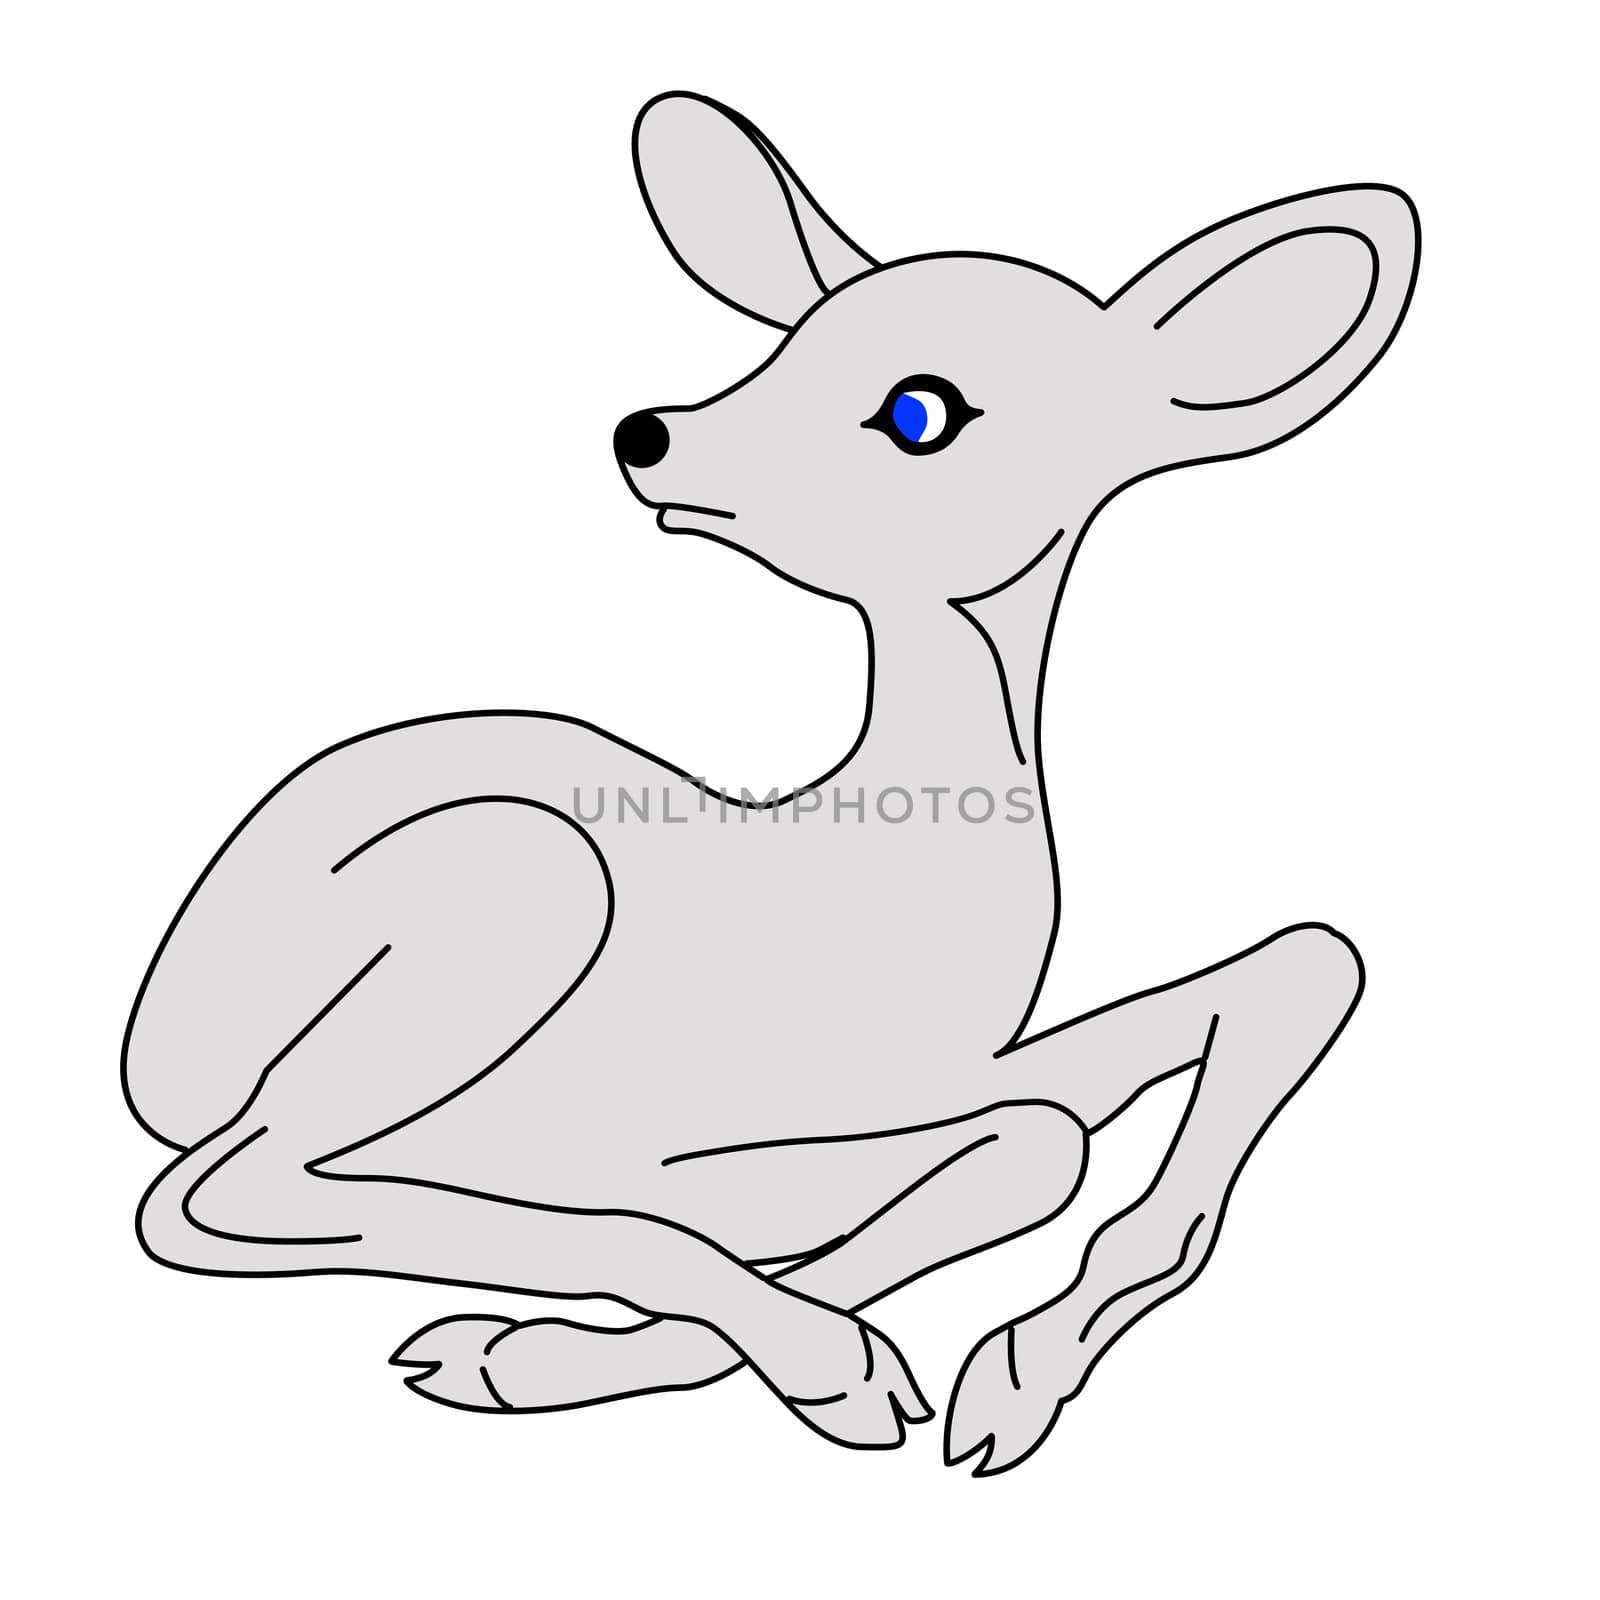 illustration small deer on white background by basel101658